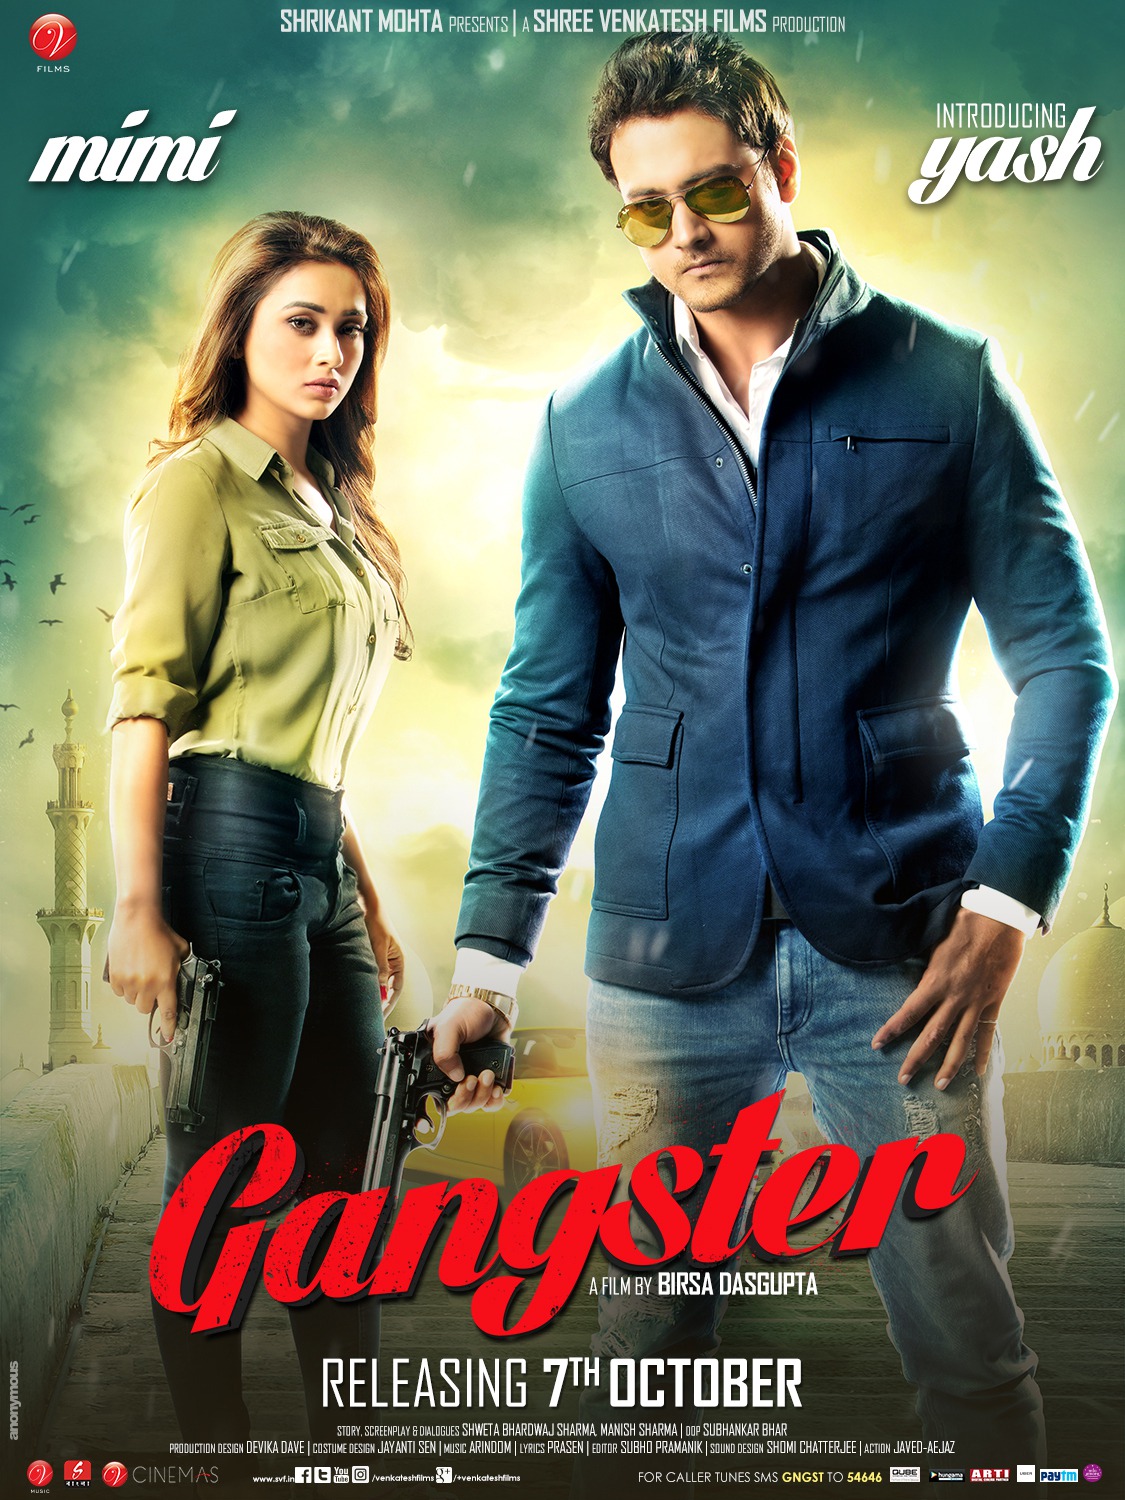 Extra Large Movie Poster Image for Gangster (#1 of 6)